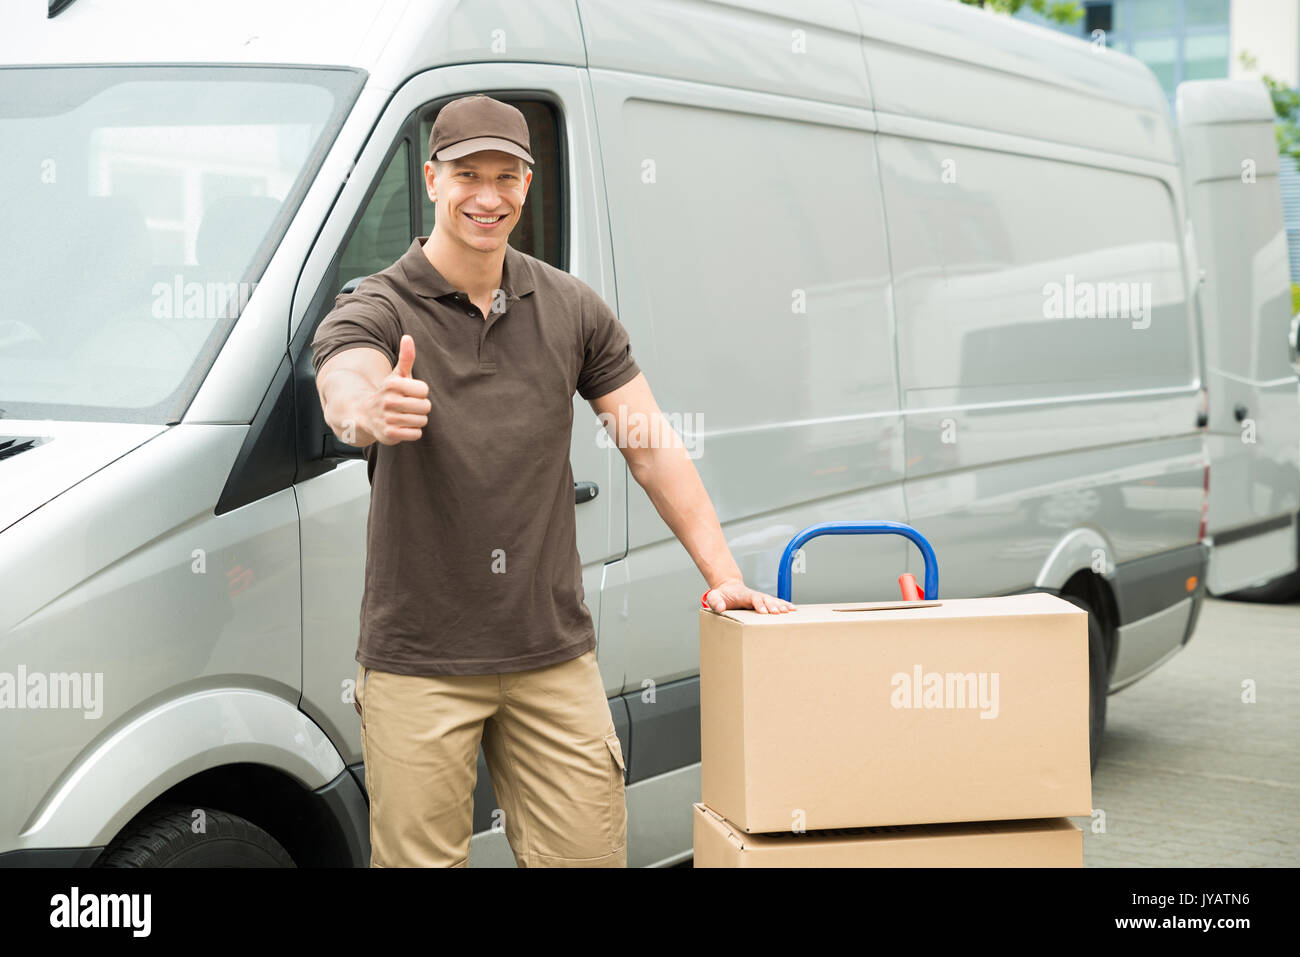 Young Delivery Man In Front Van With Cardboard Boxes Showing Thumbs Up Sign Stock Photo